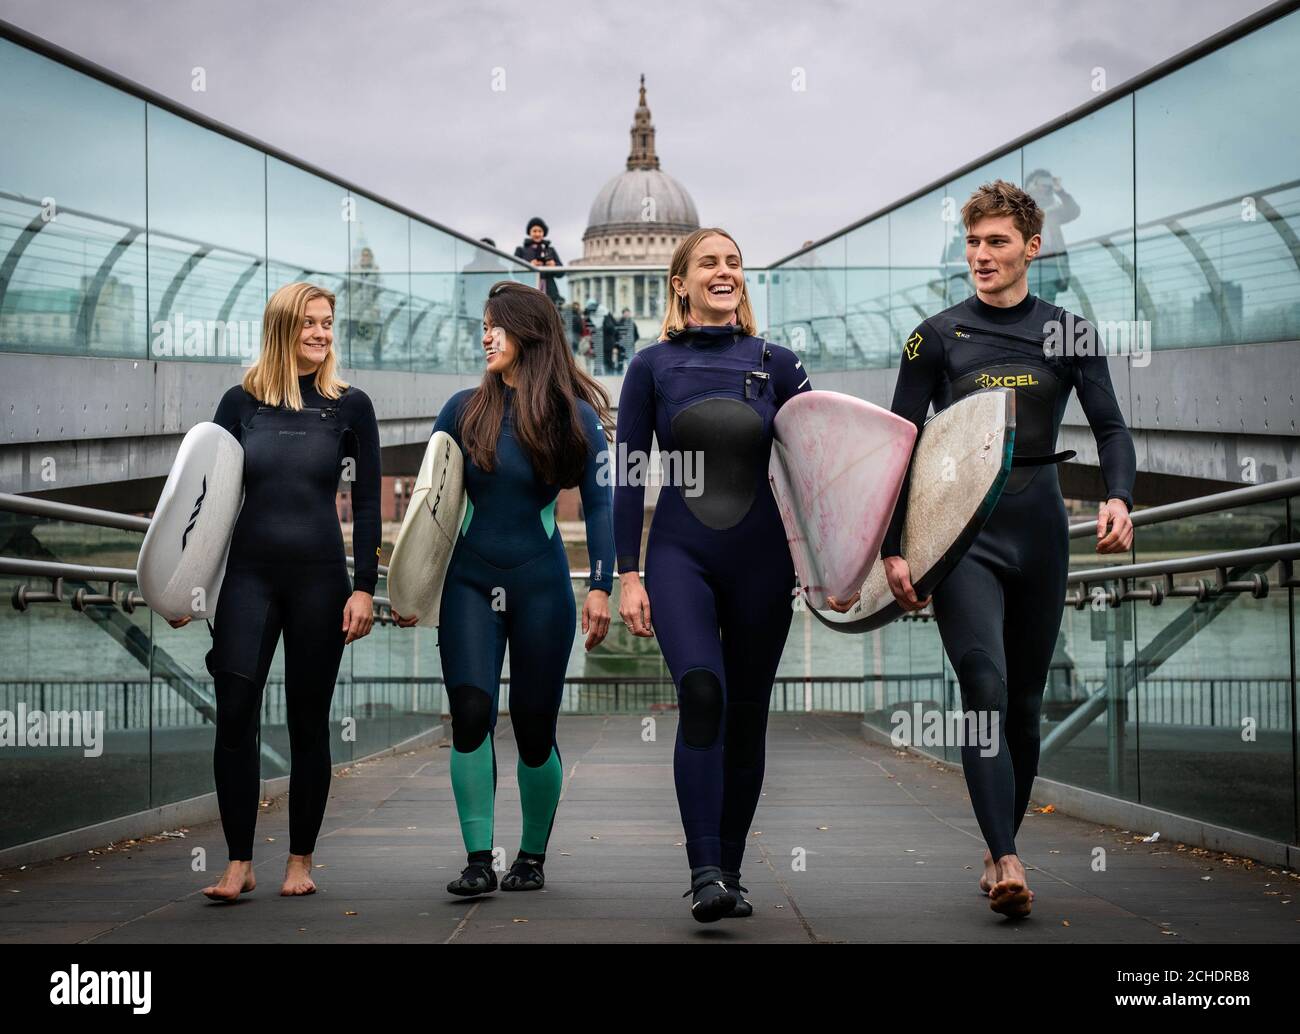 (Left to right) Surfers Jessica Rowe, Veranika Lim, Sophie Hellyer and Frank Hodgson cross London's Millennium Bridge as a partnership is announced between Lee Valley Regional Park Authority and The Wave to create an inland surfing destination in the capital for people of all ages, backgrounds and abilities. Stock Photo